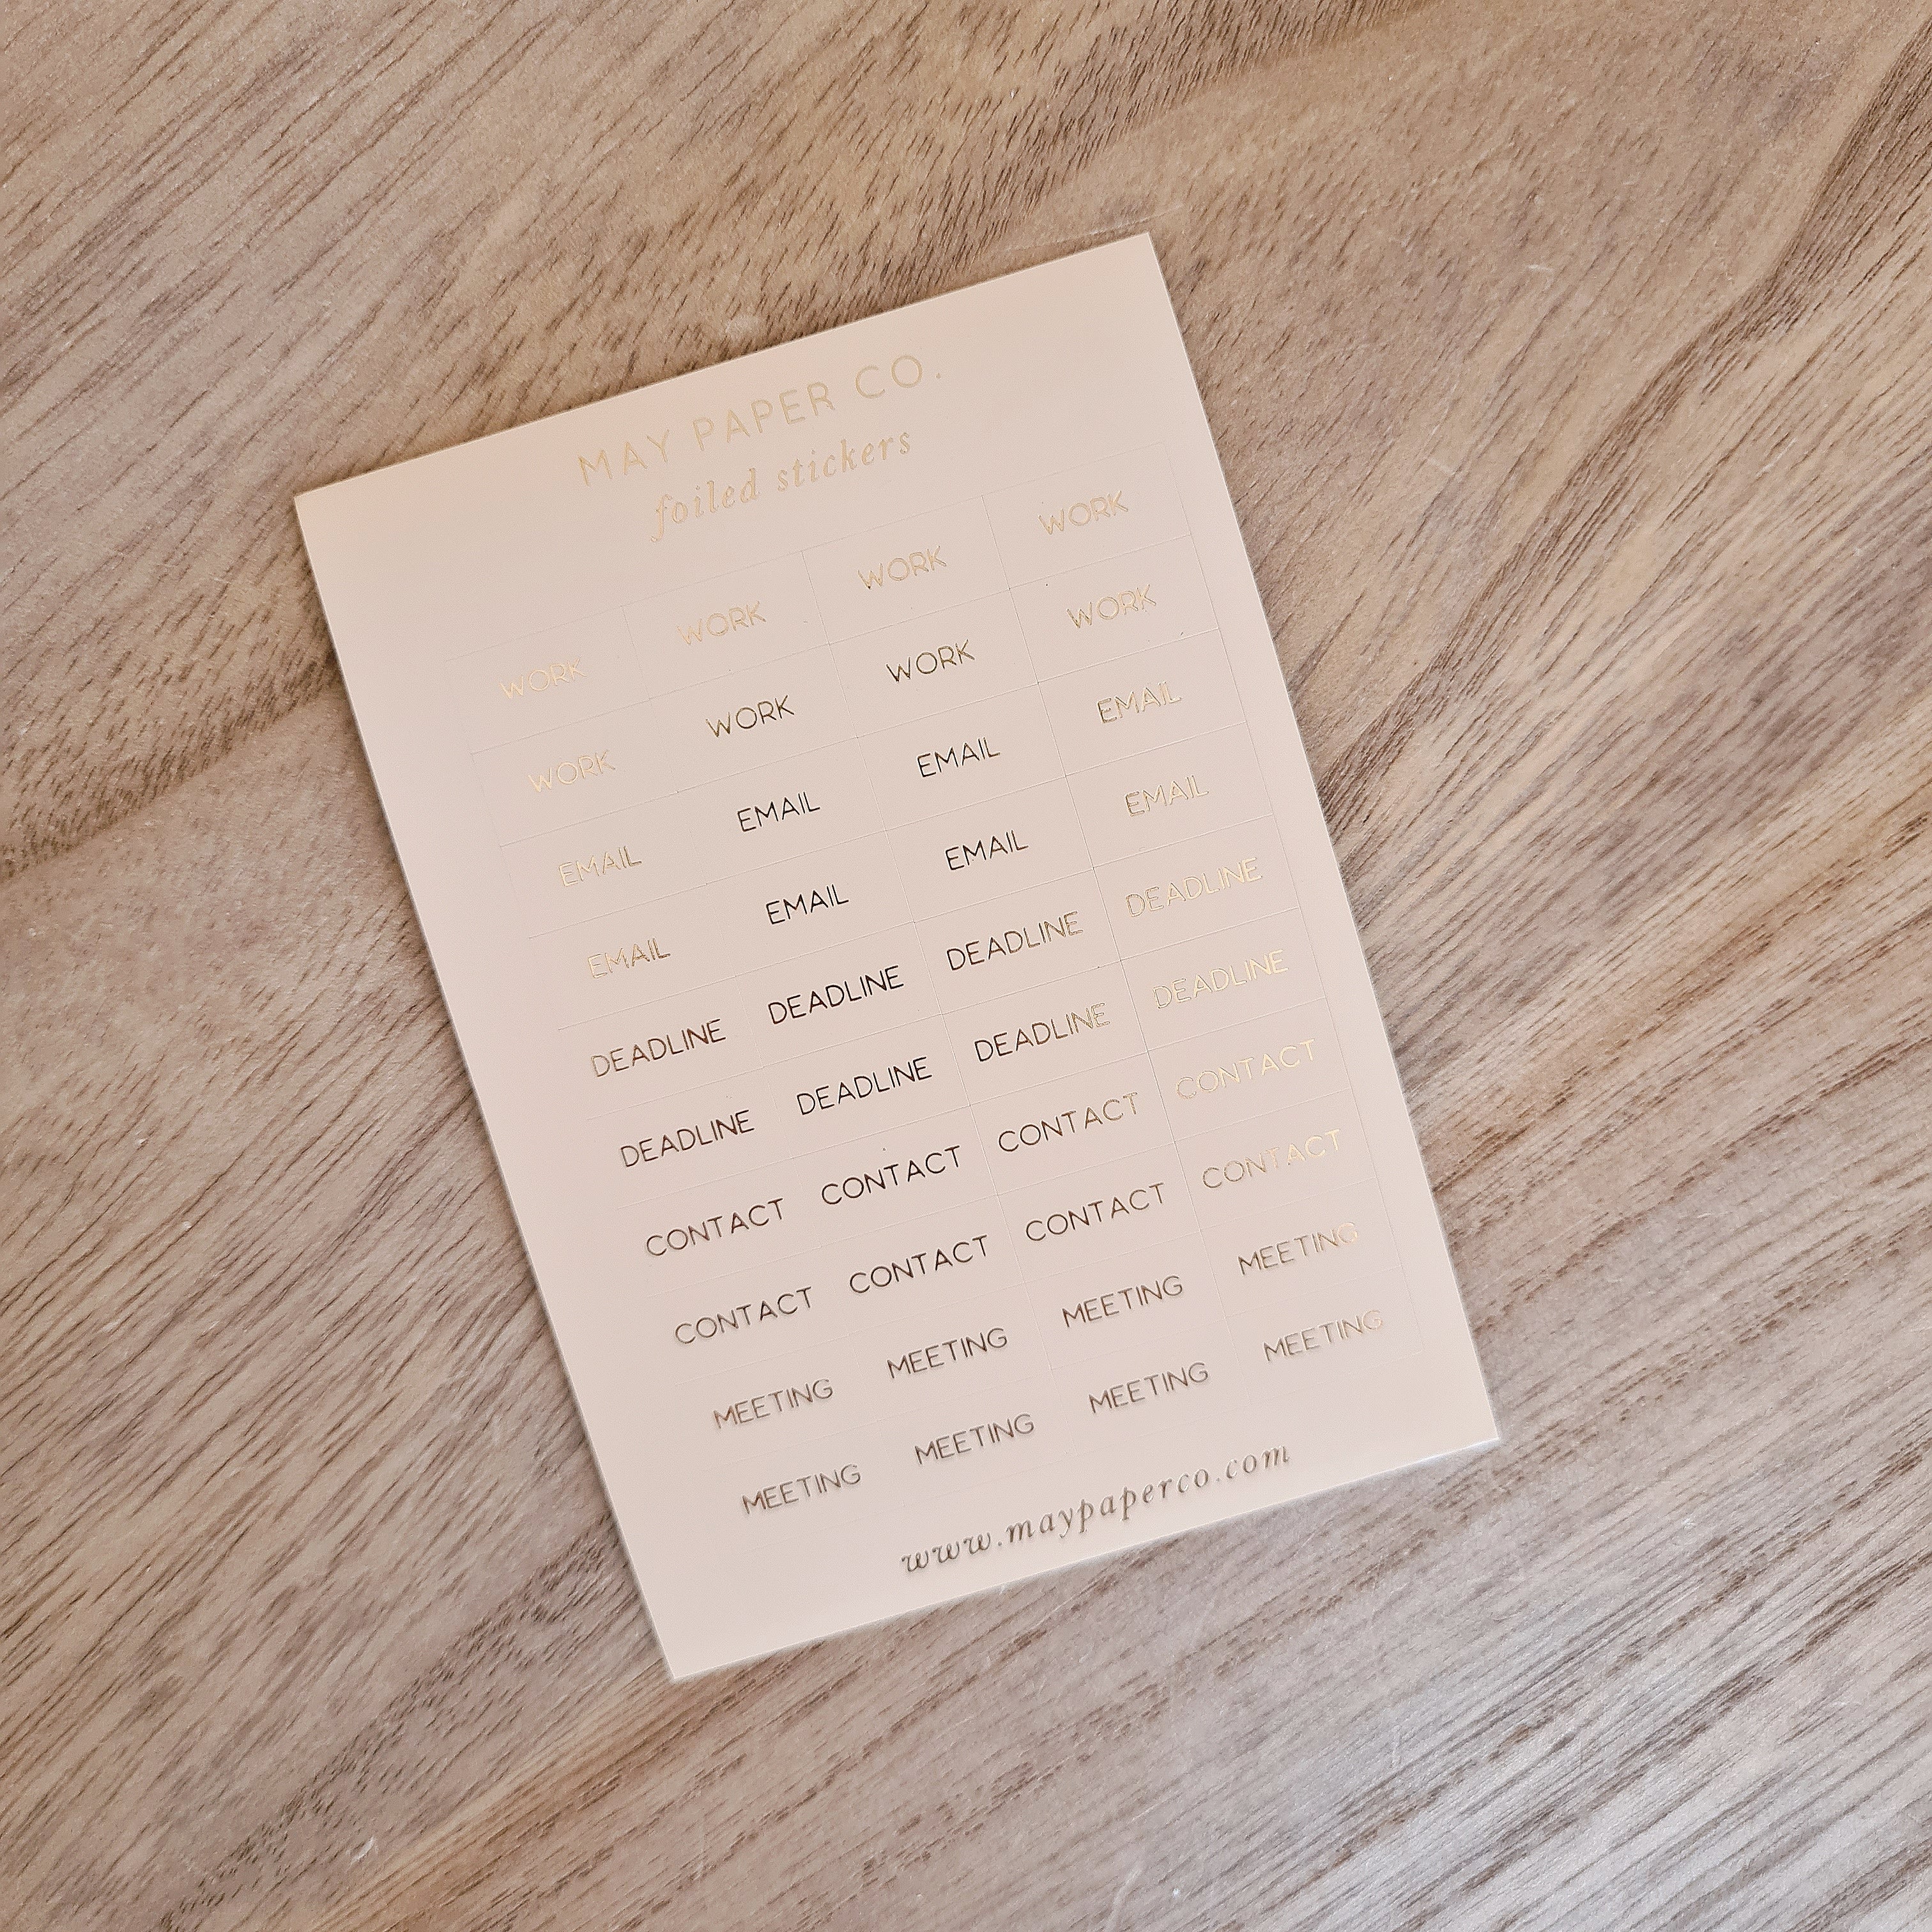 WORK | Sticker Set (Nude with Gold Foil)